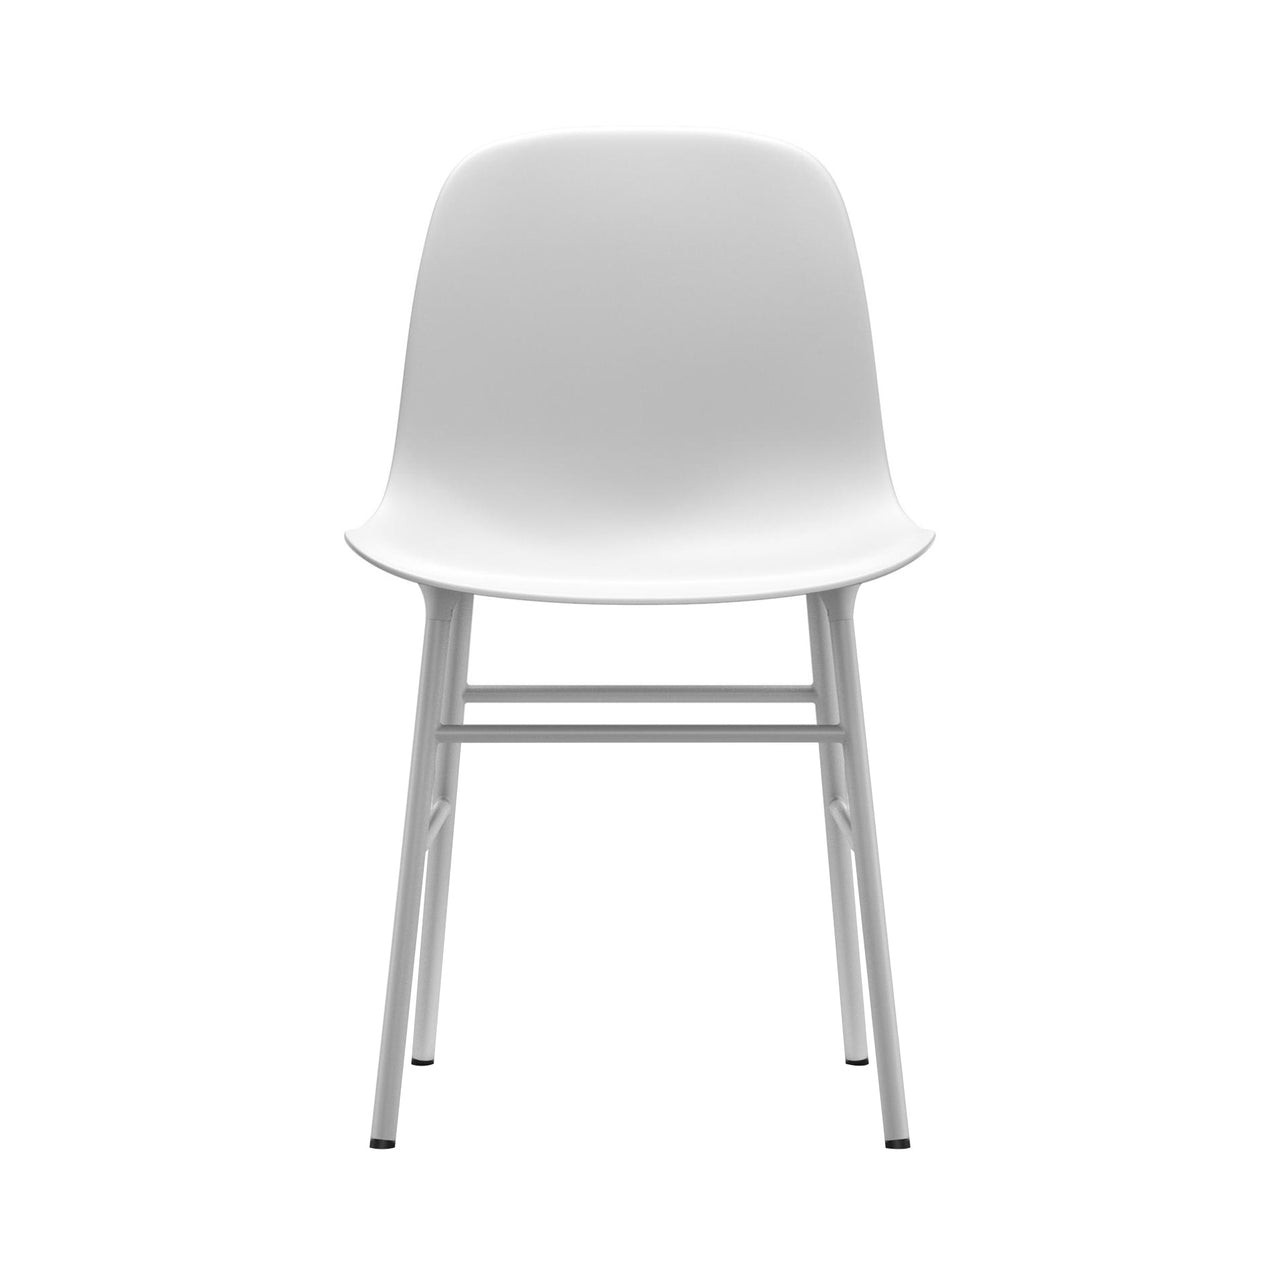 Form Chair: Steel + White